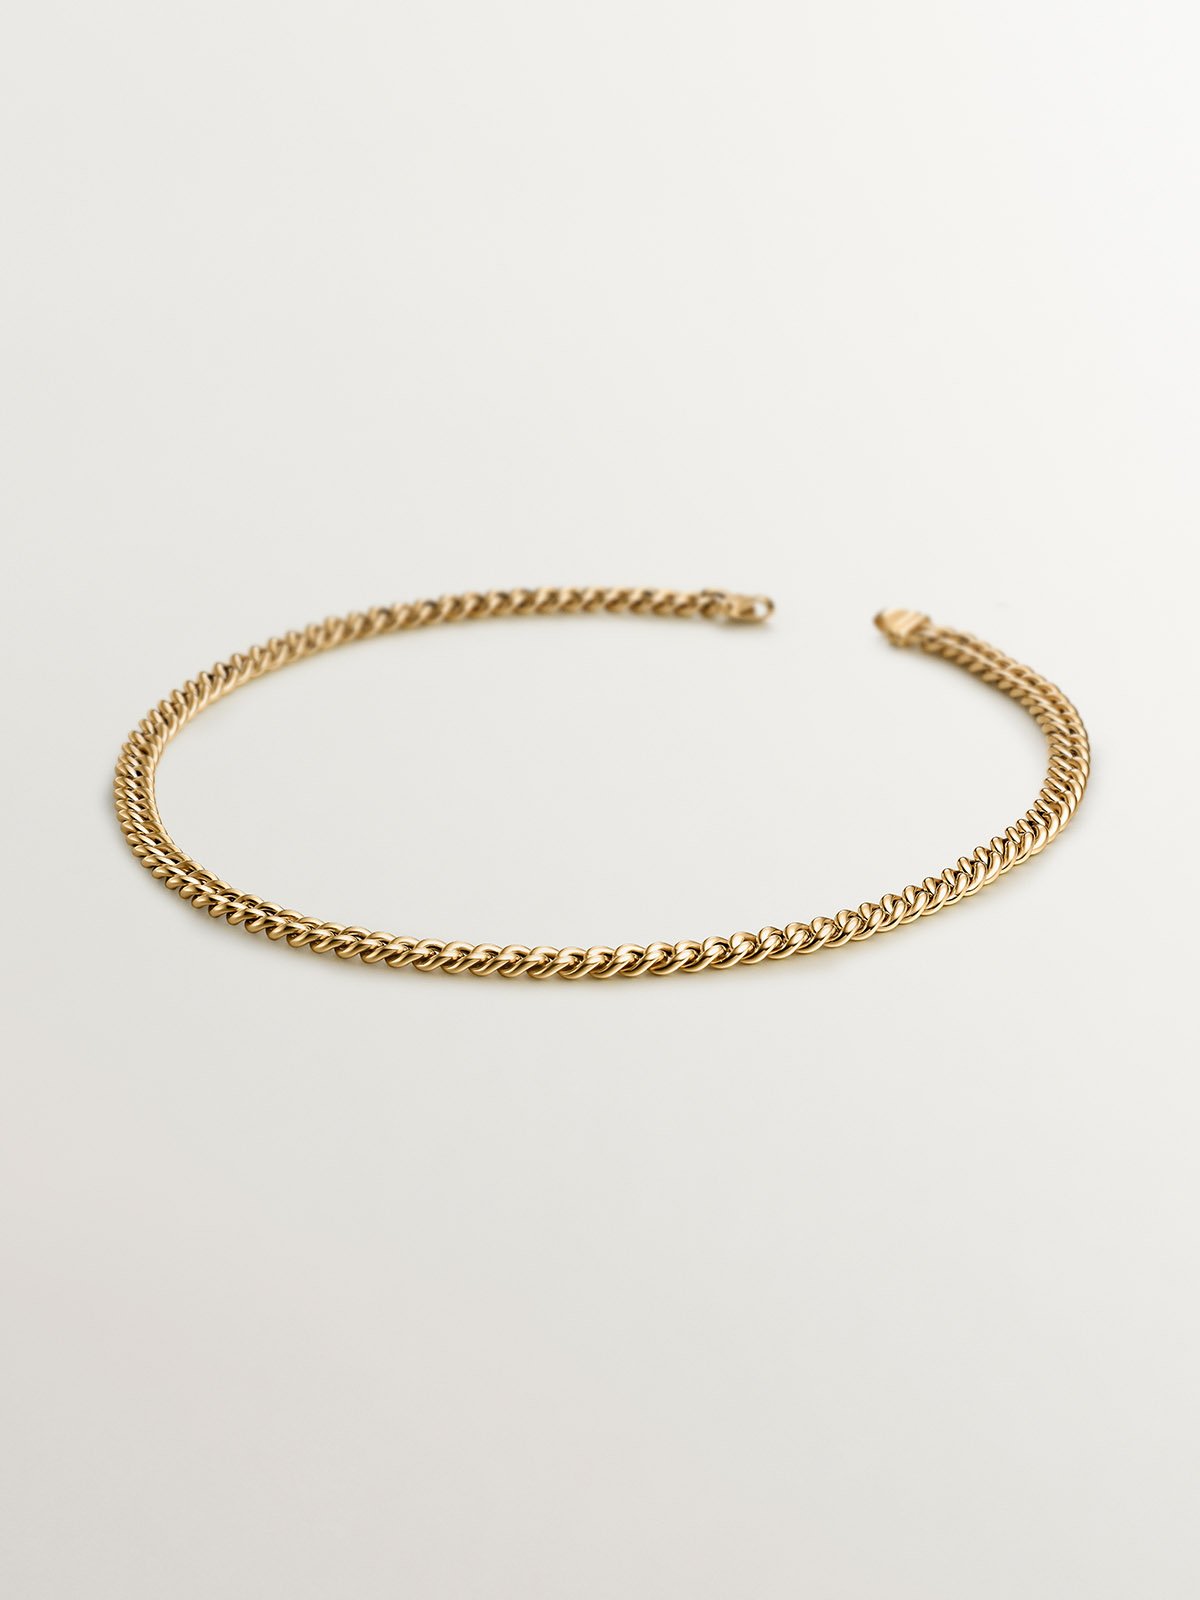 Chain of barbed links made of 925 silver, bathed in 18K yellow gold.